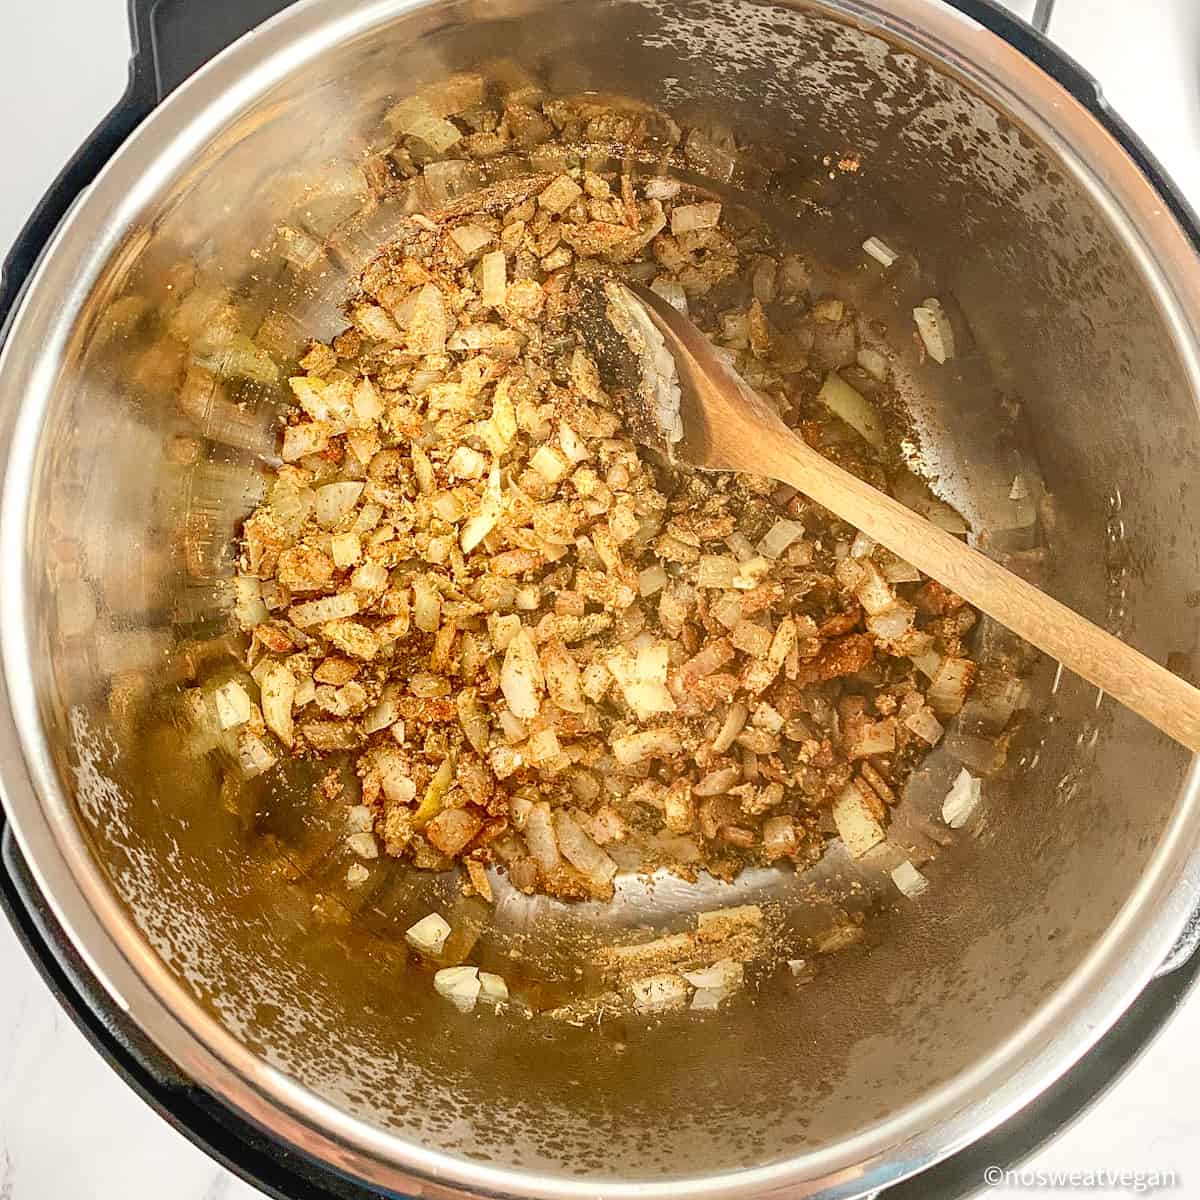 Onions and spices cooking in an Instant Pot.